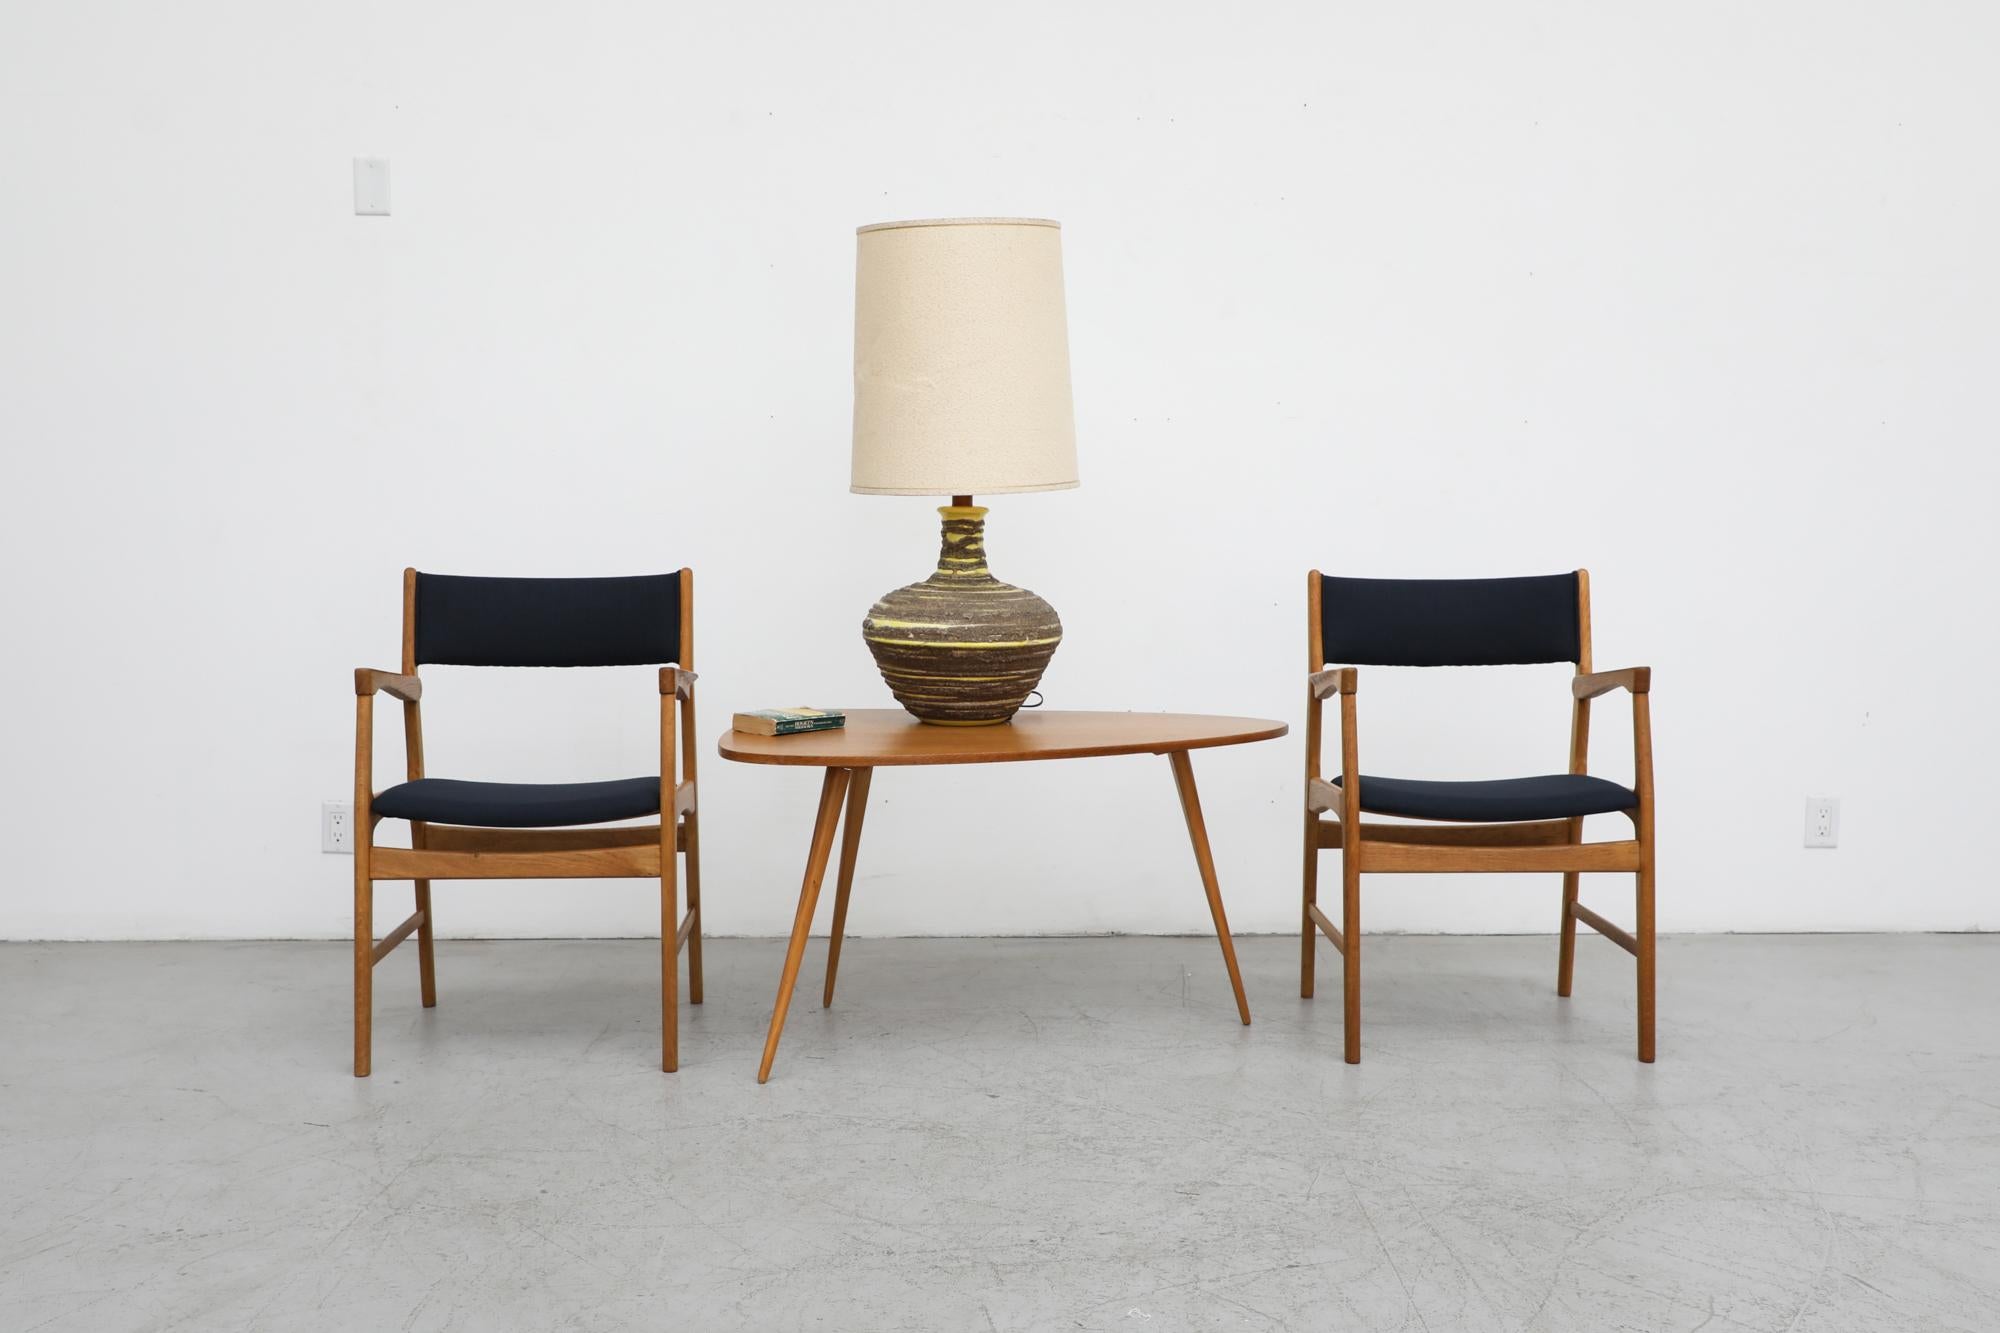 Pair of Mid-Century Danish oak arm chairs in the style of Hans Wegner. These chairs have solid oak frames, delicately carved armrests and newly upholstered black seating.The frames are in good original condition with wear consistent with their age